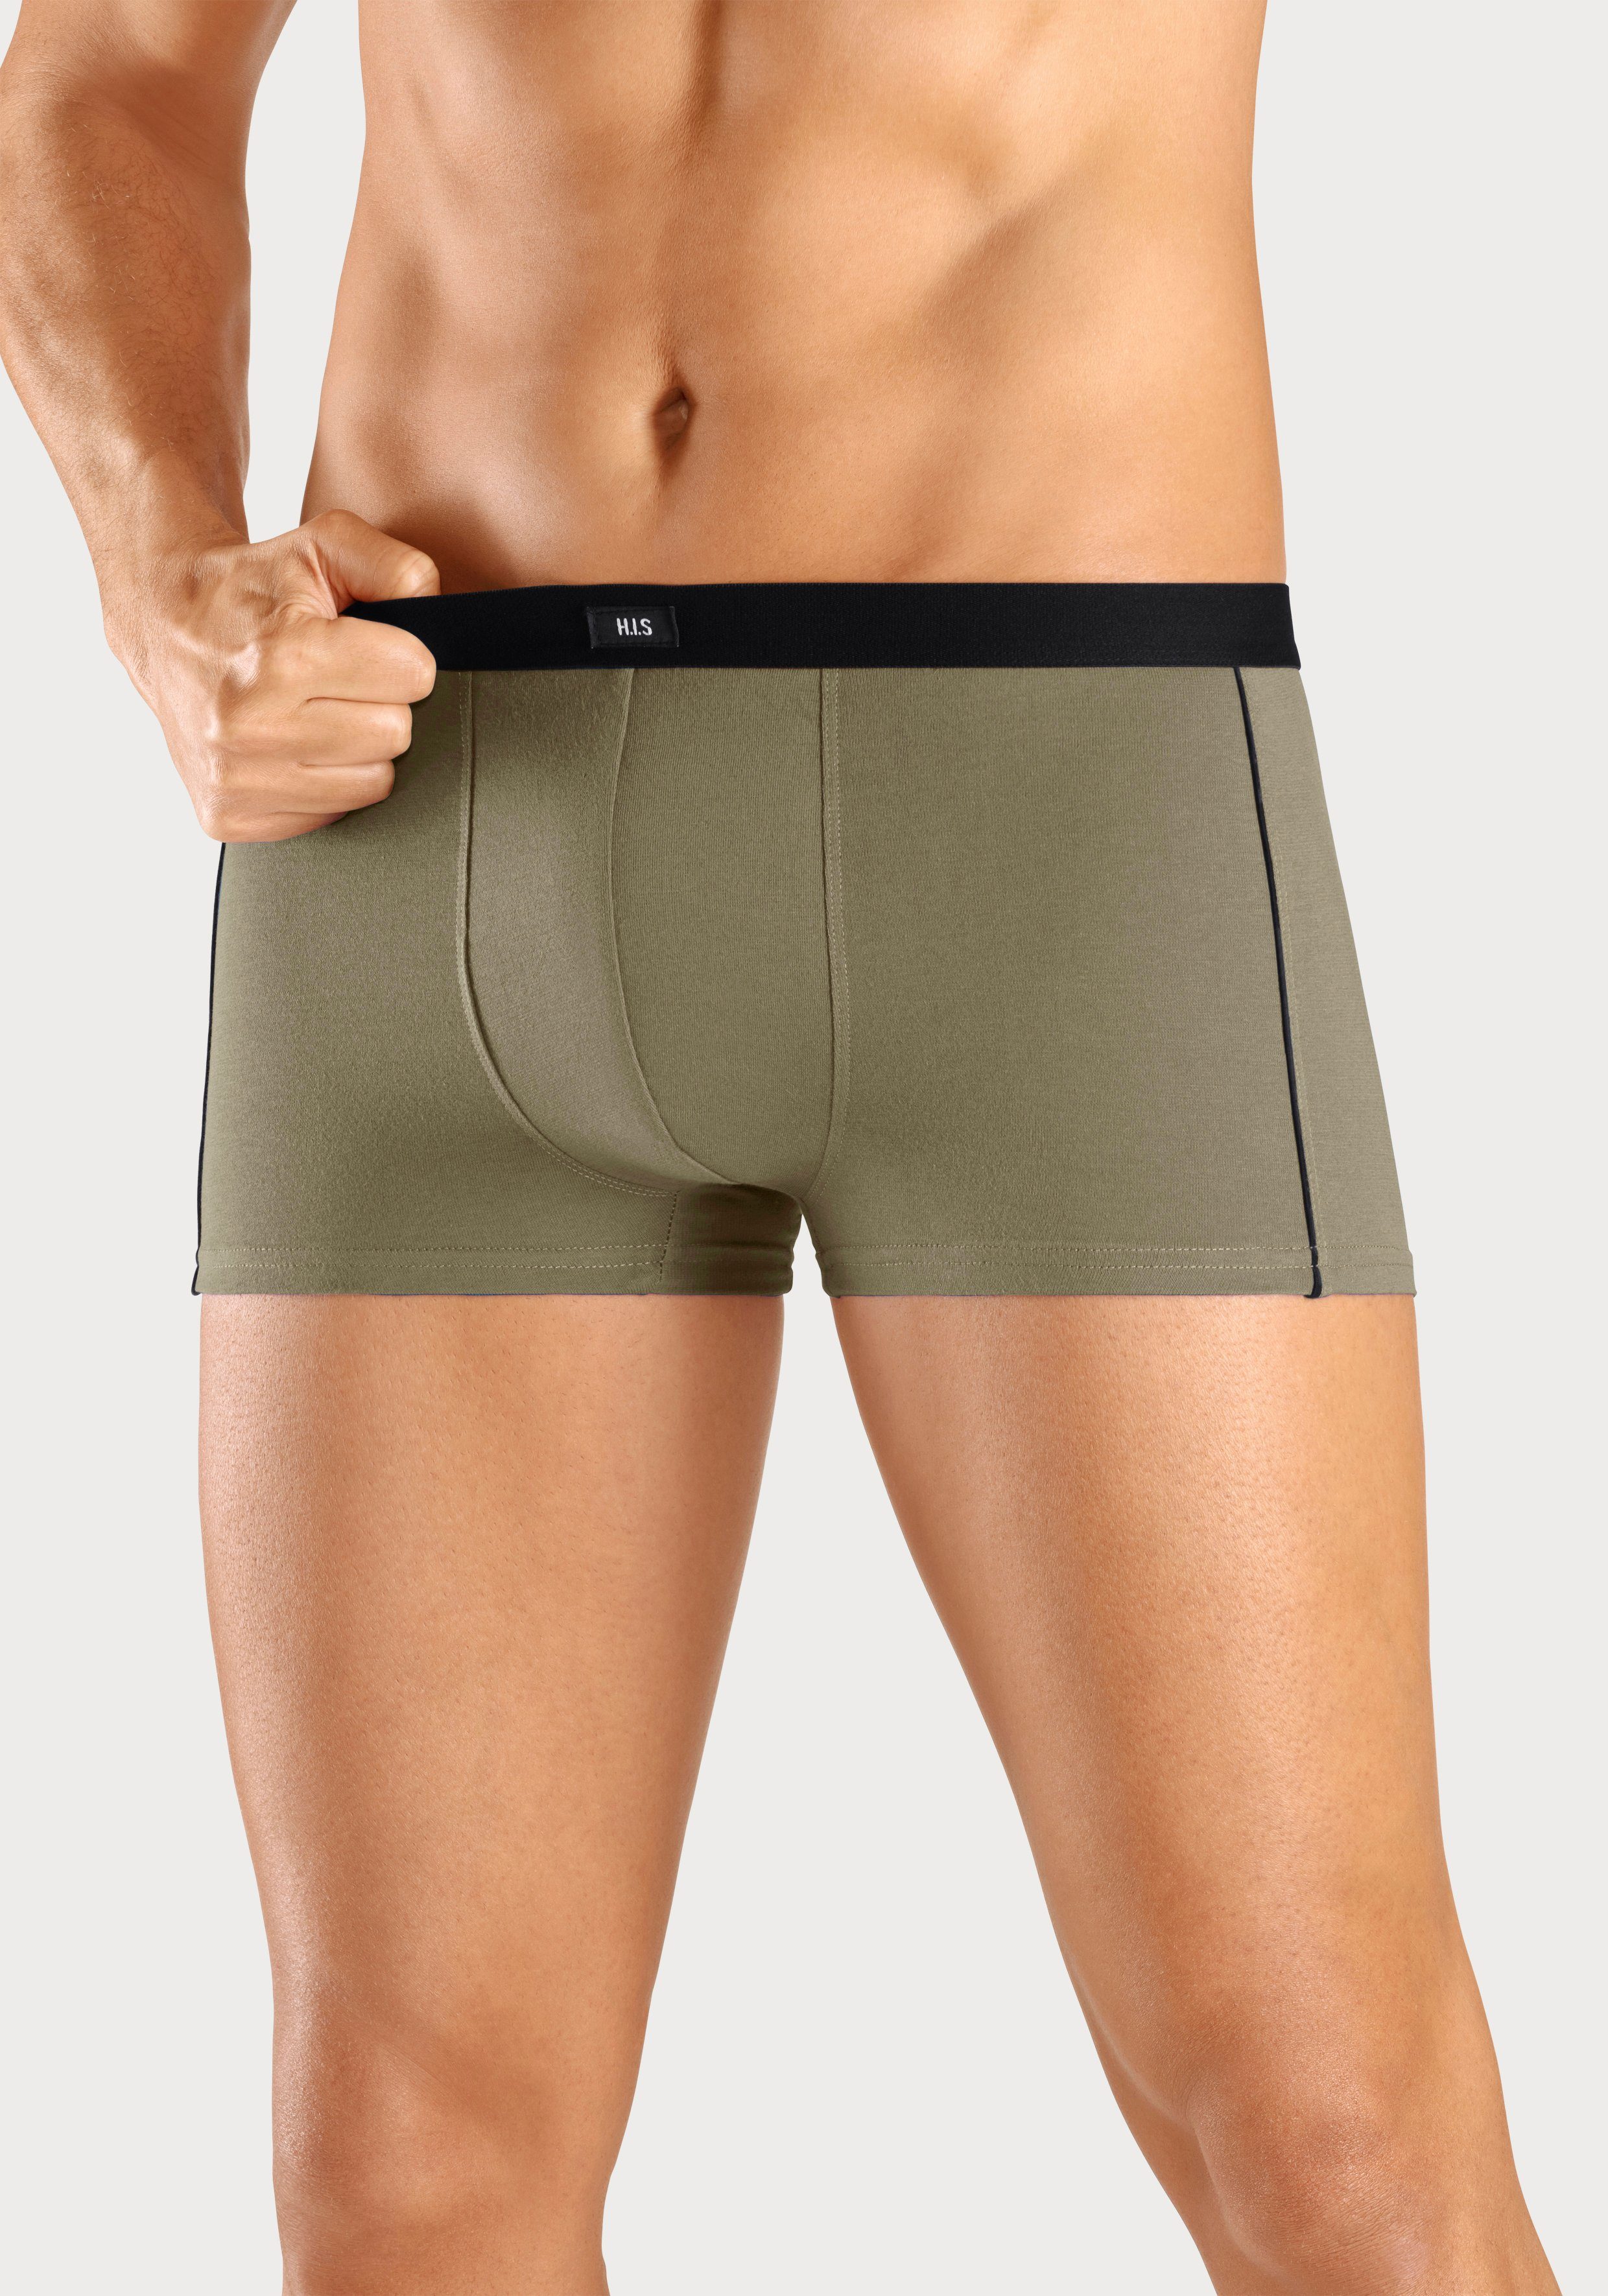 H.I.S (Packung, grau-olivgrün-bordeaux in 3-St) schmalen Hipster-Form Piping Boxershorts mit